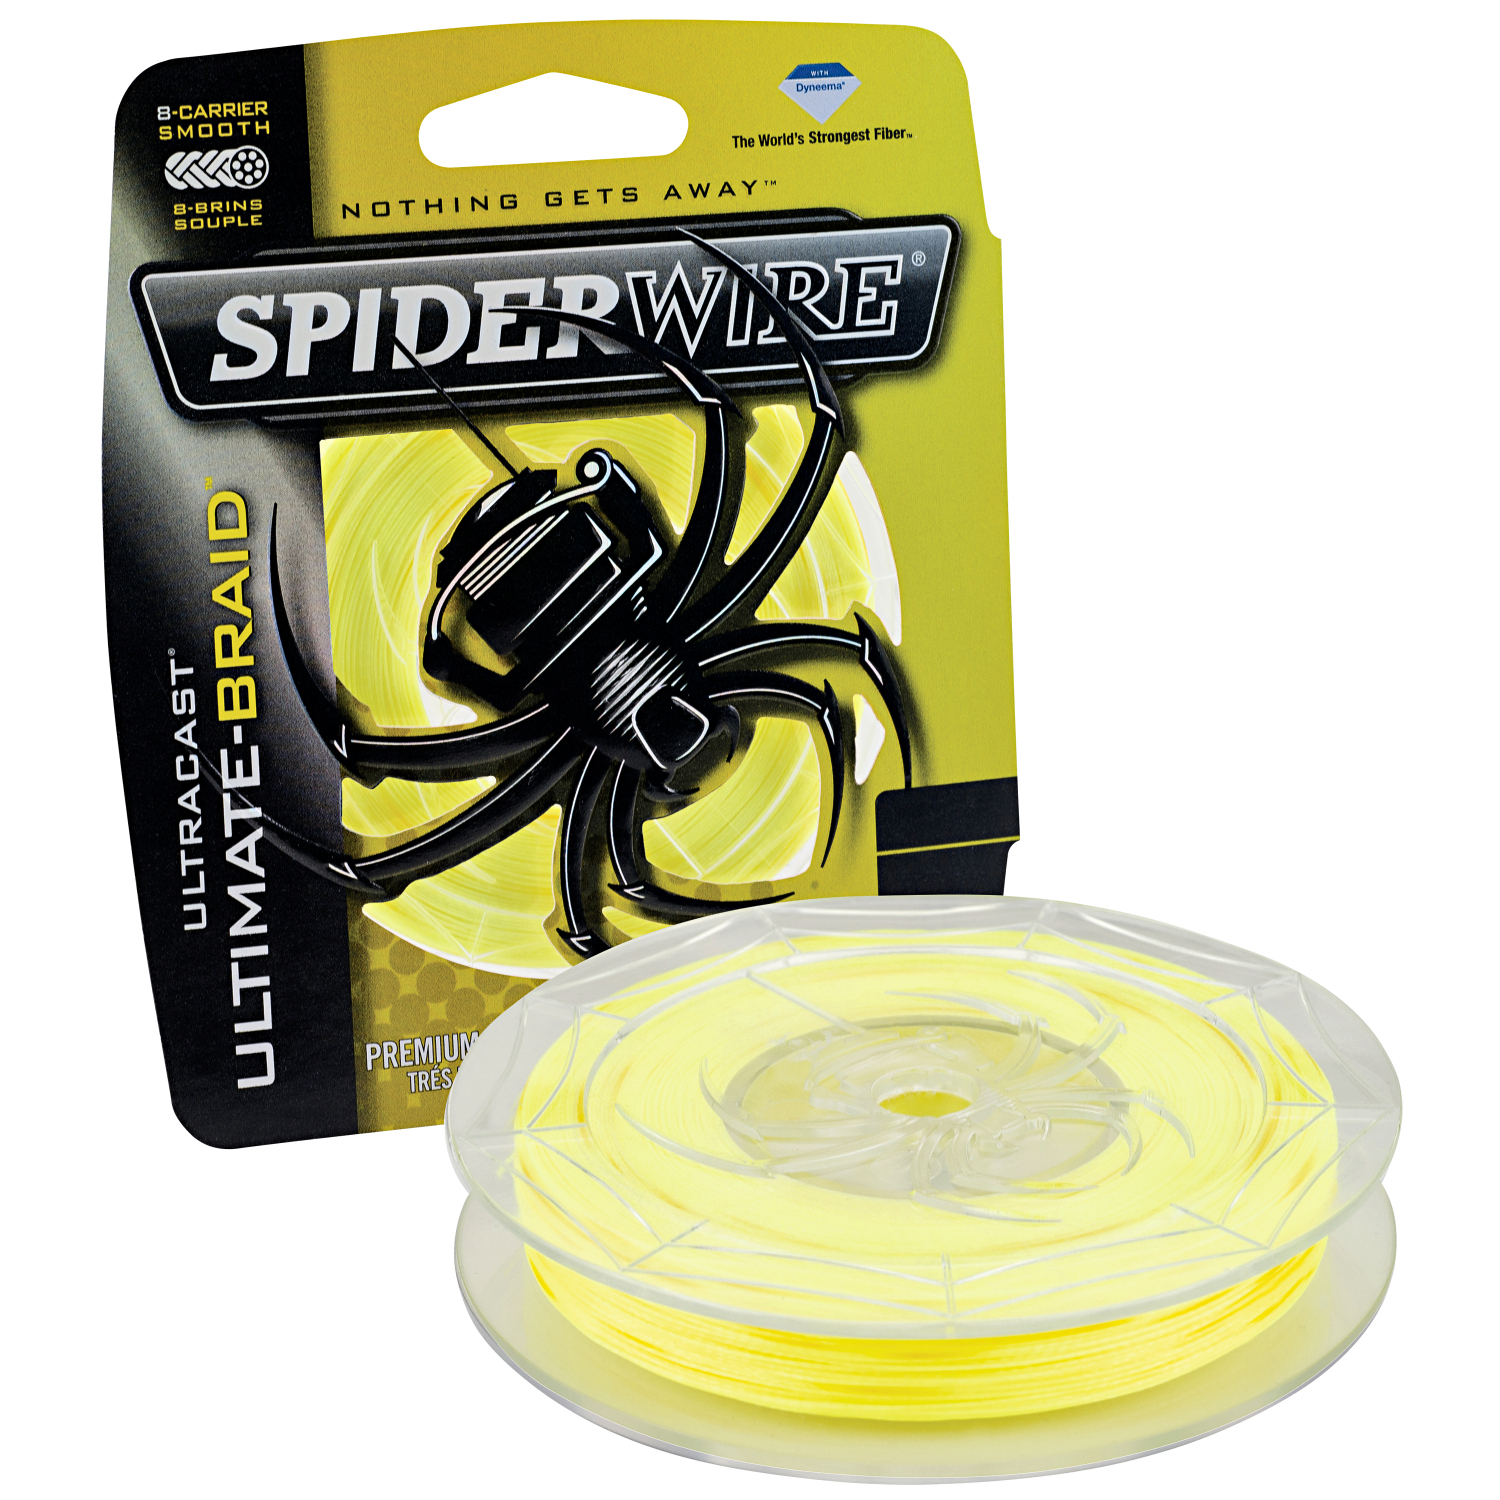 https://images.askari-sport.com/en/product/1/large/spiderwire-fishing-line-ultracast-8-carrier-yellow-110-m.jpg